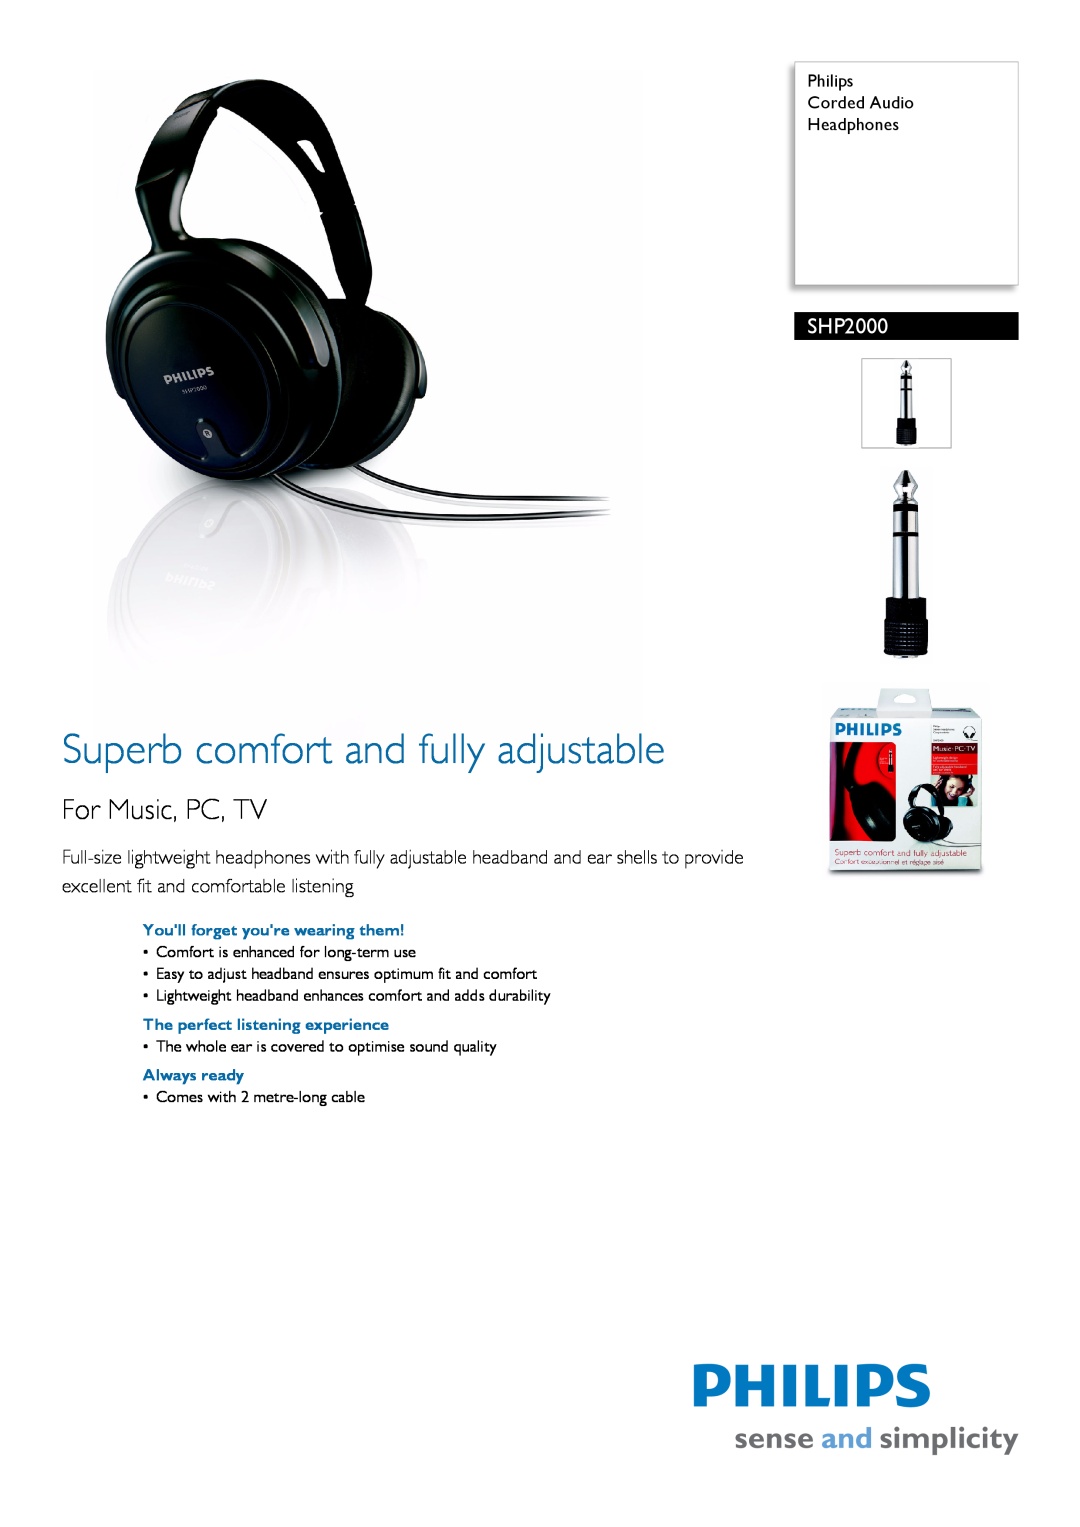 Philips SHP 2000 manual SHP2000, Philips Corded Audio Headphones, Superb comfort and fully adjustable, For Music, PC, TV 